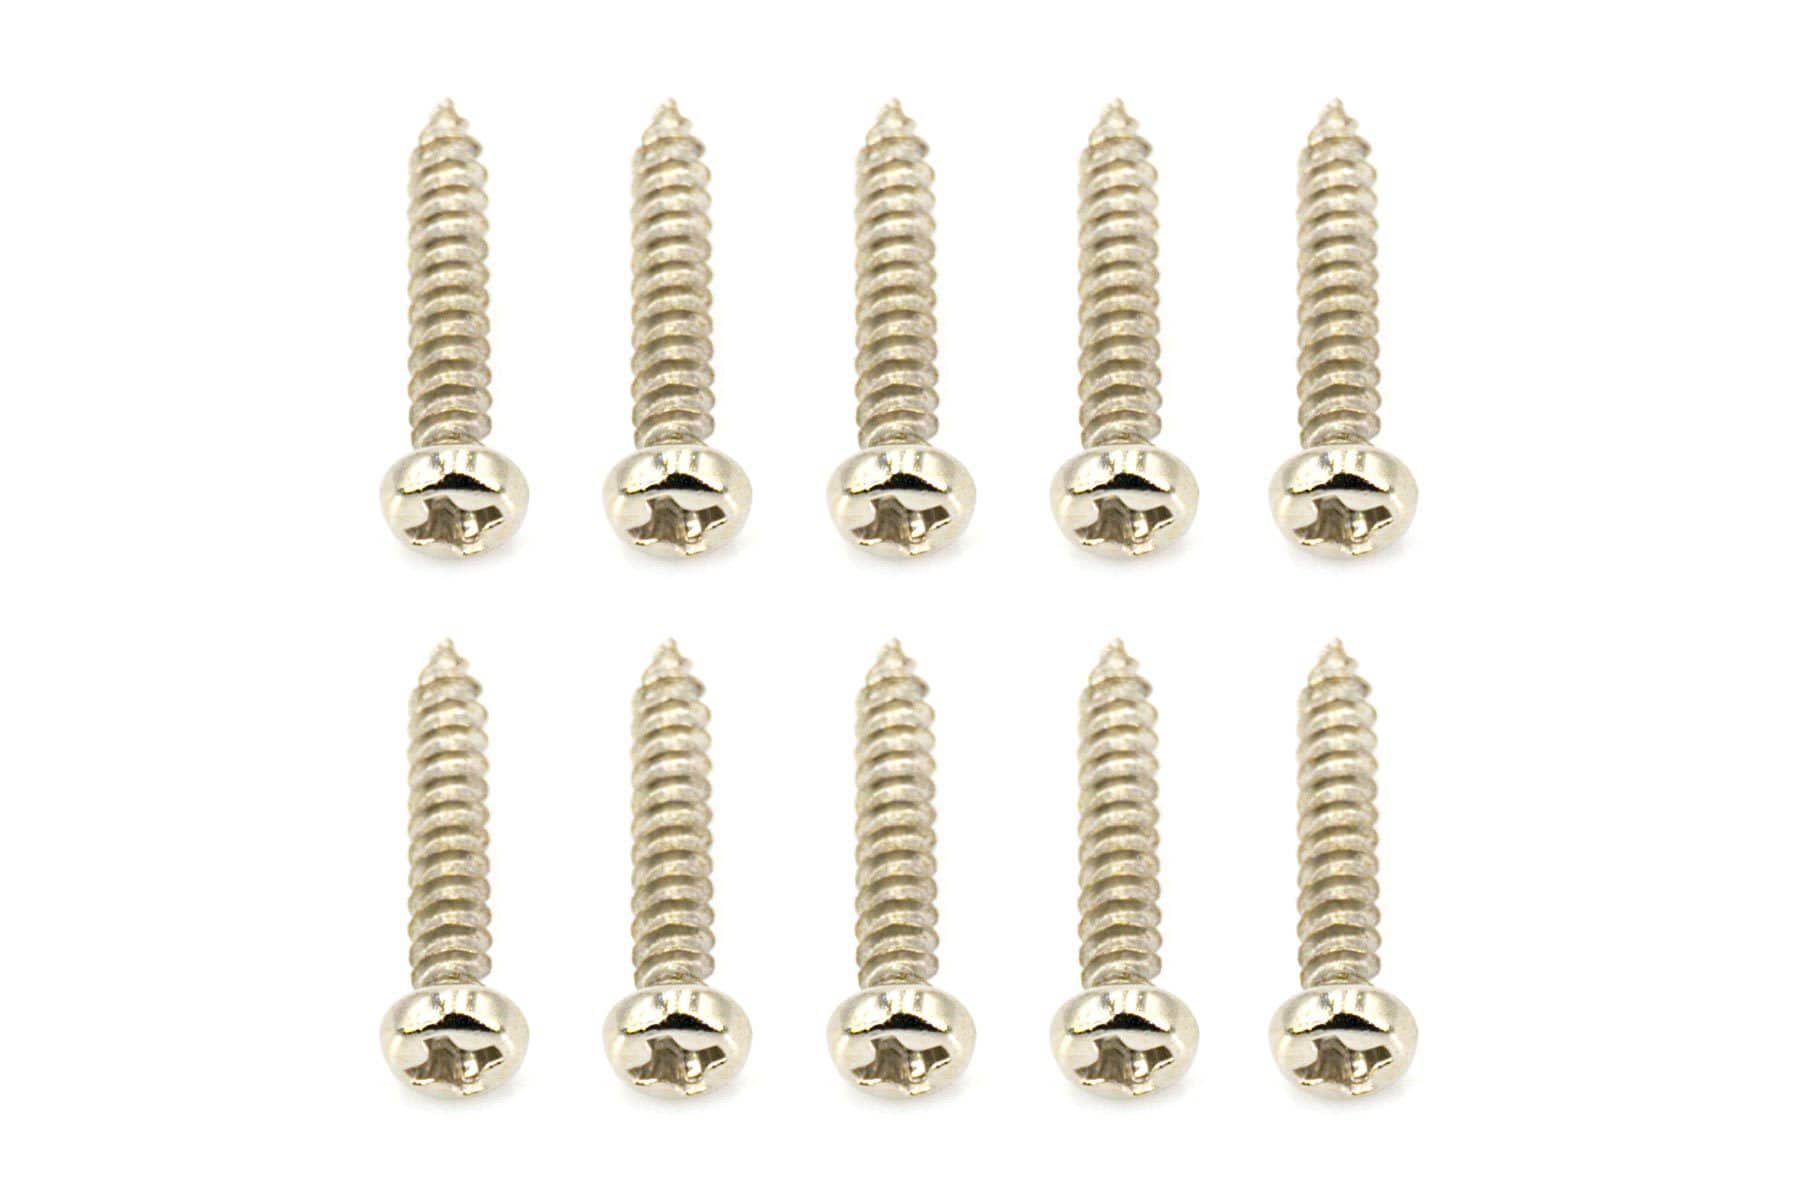 BenchCraft 3mm x 16mm Self-Tapping Screws (10 Pack)